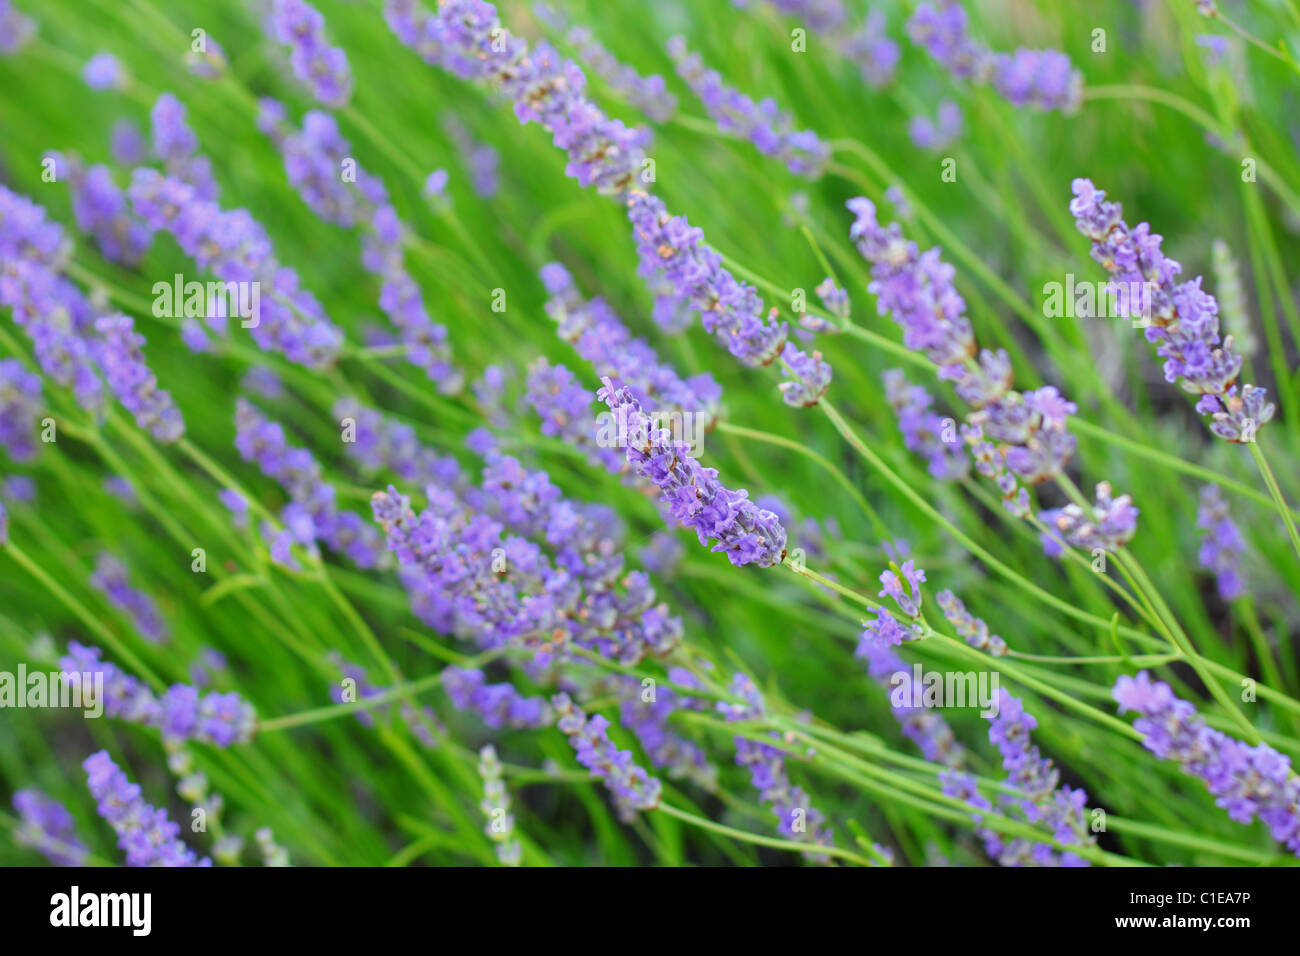 Closeup of lavender flowers with green stems Stock Photo